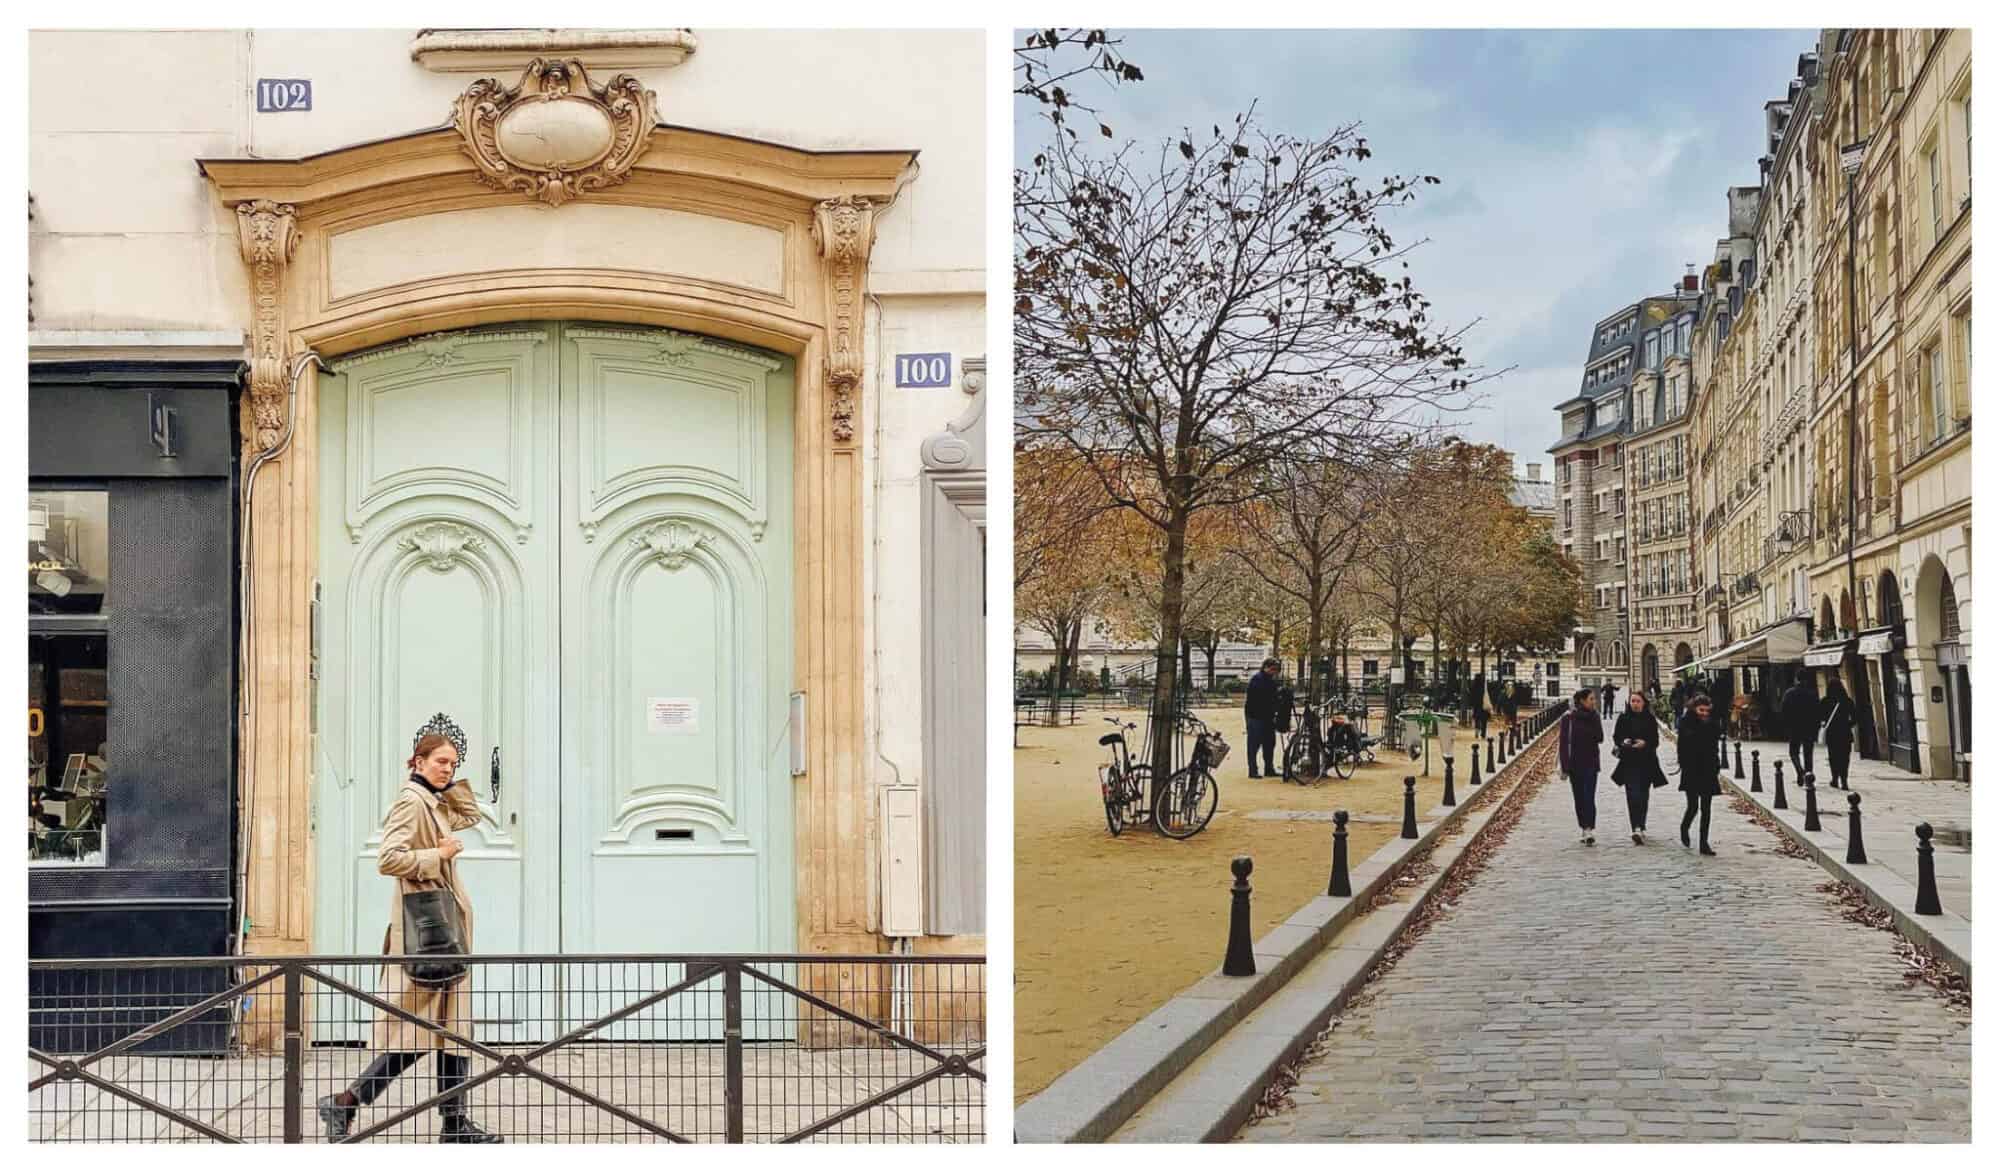 Left: A woman in a tan trench coat and black boots walks past a teal, blue-green Parisian door numbered 102 on a bright day. Right: Three friends walk together in Place Dauphine on a late autumn, early winter day with slightly cloudy blue skies and bright sun.